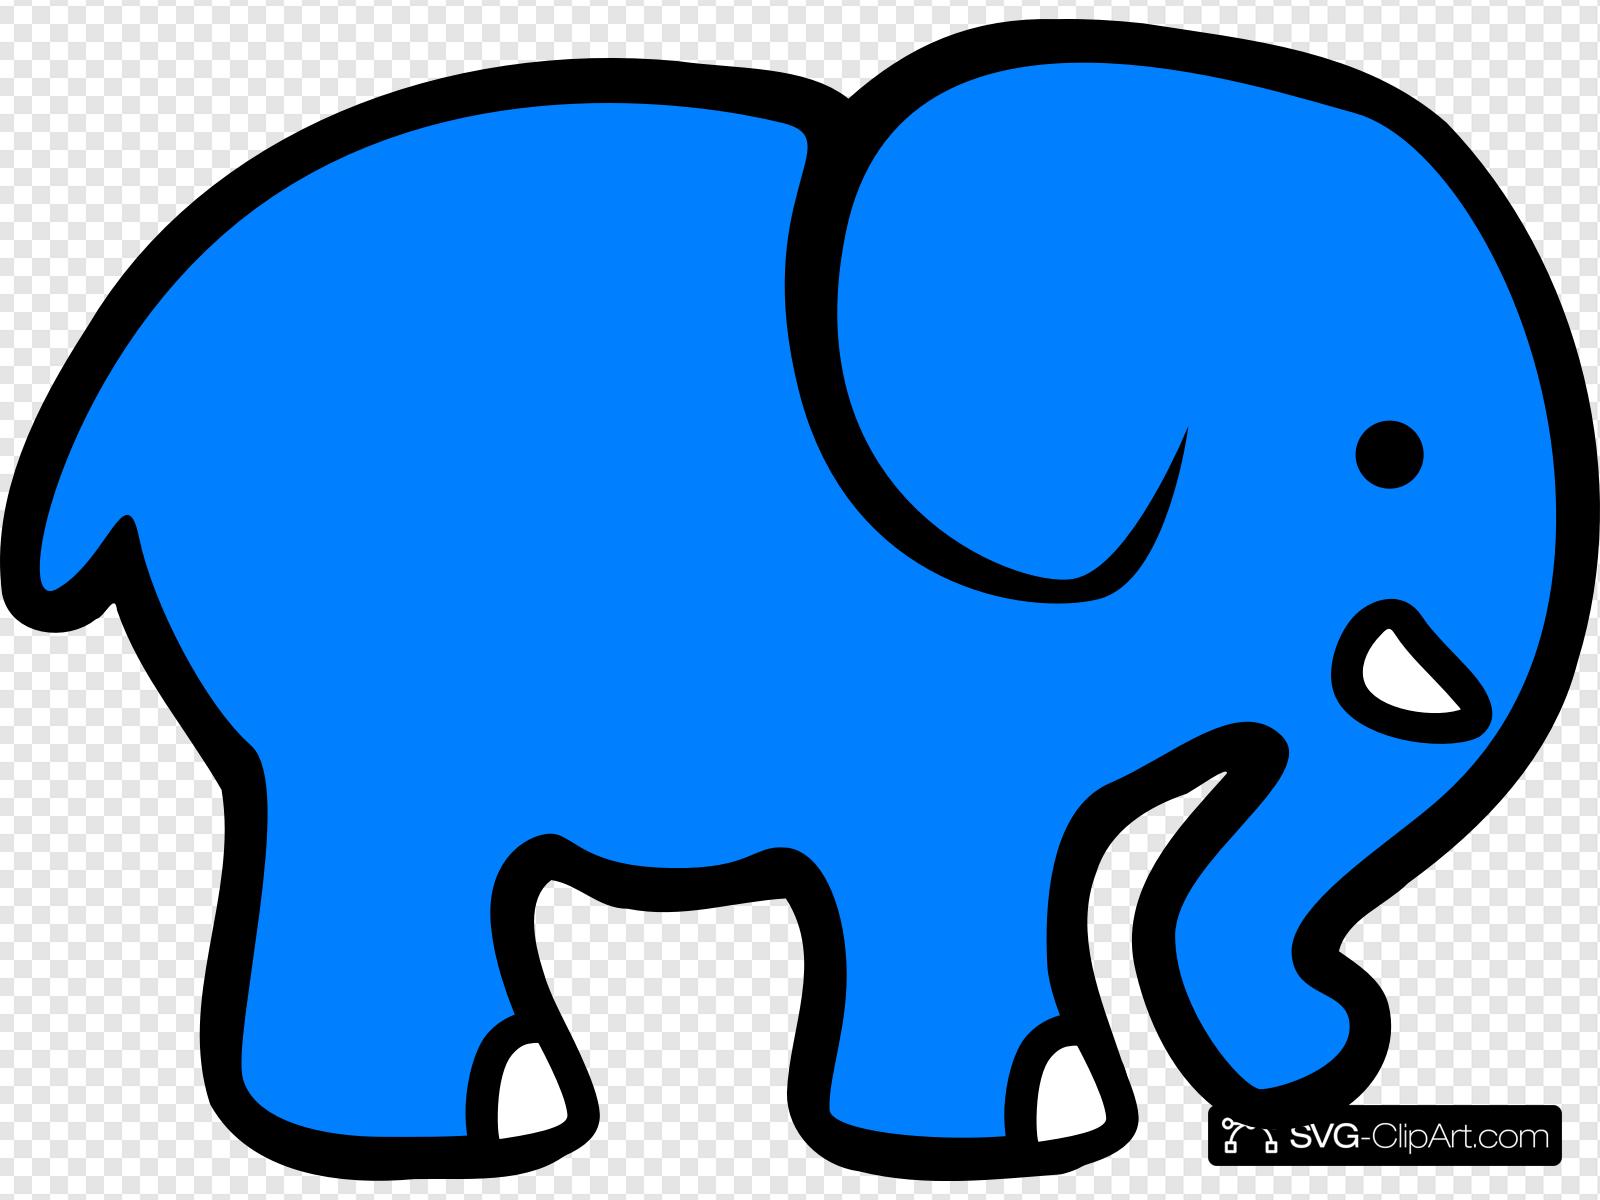 Blue Elephant Clip art, Icon and SVG